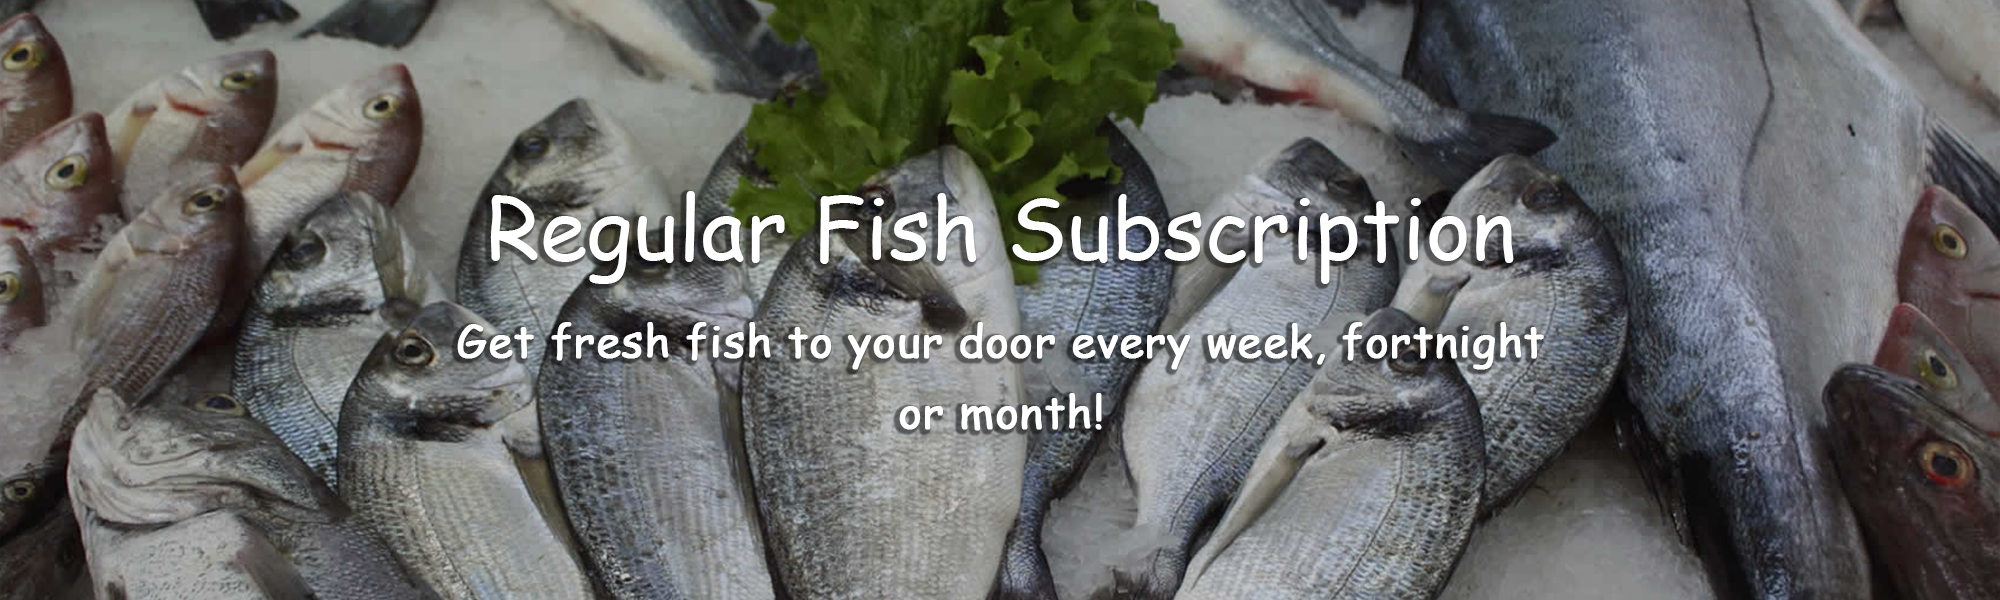 Fish delivery subscription service